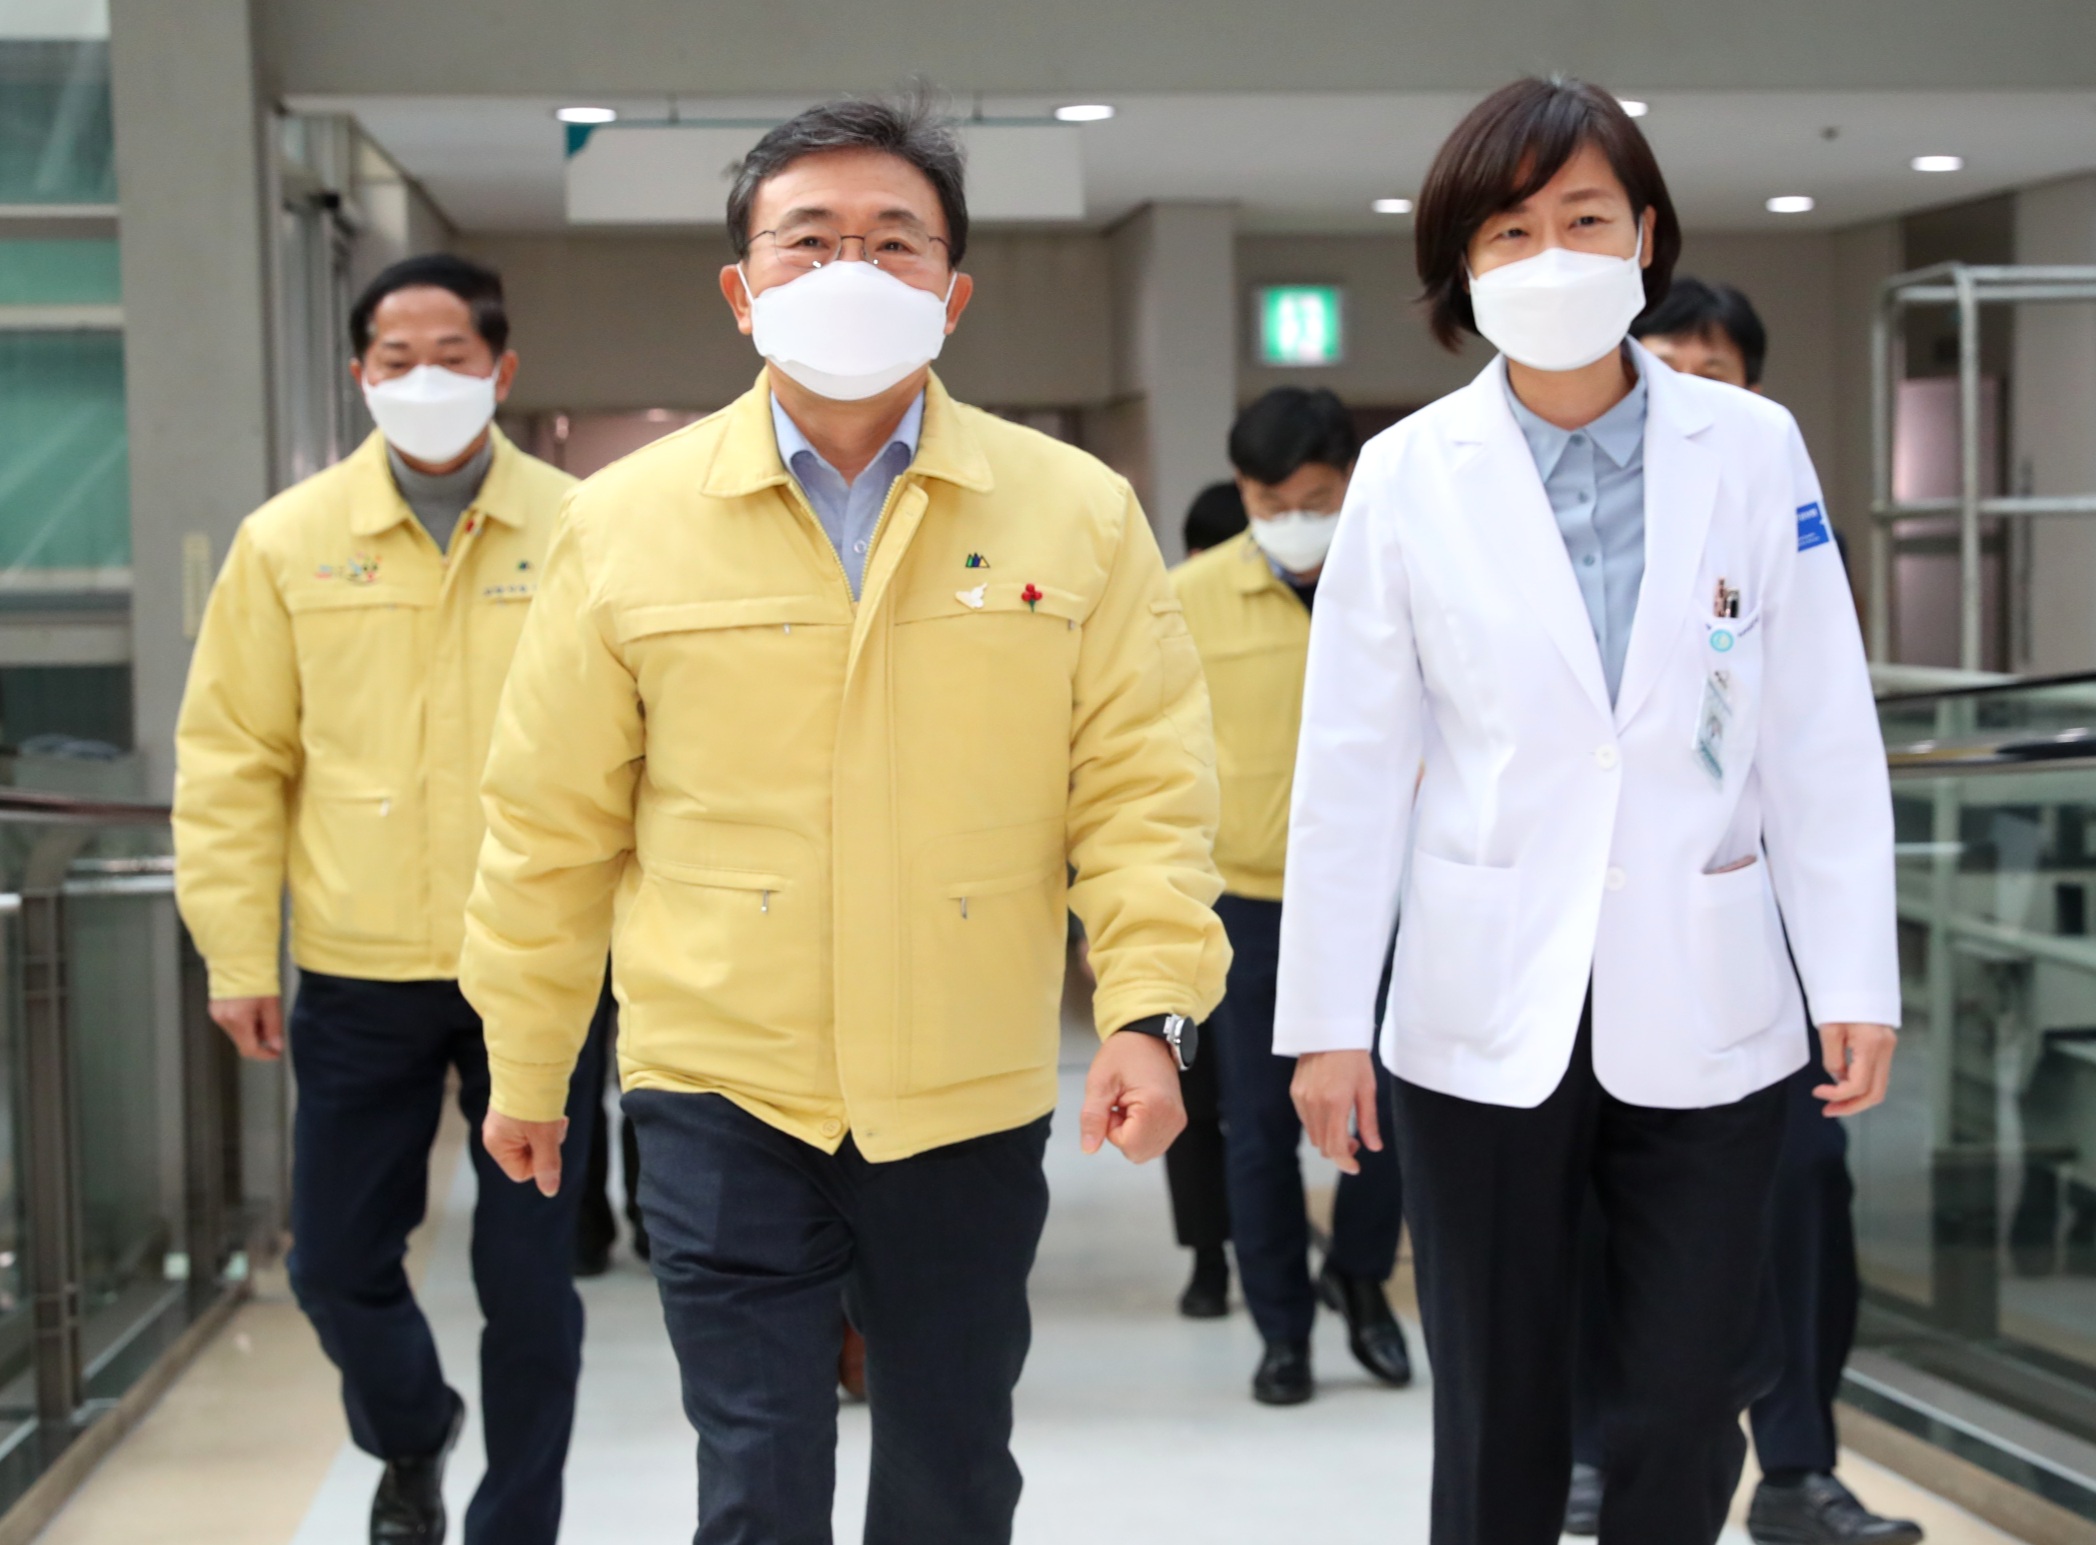 Minister Kwon Checks Hospital Networks in North Gyeonggi for COVID-19 Treatment (January 3) 사진7